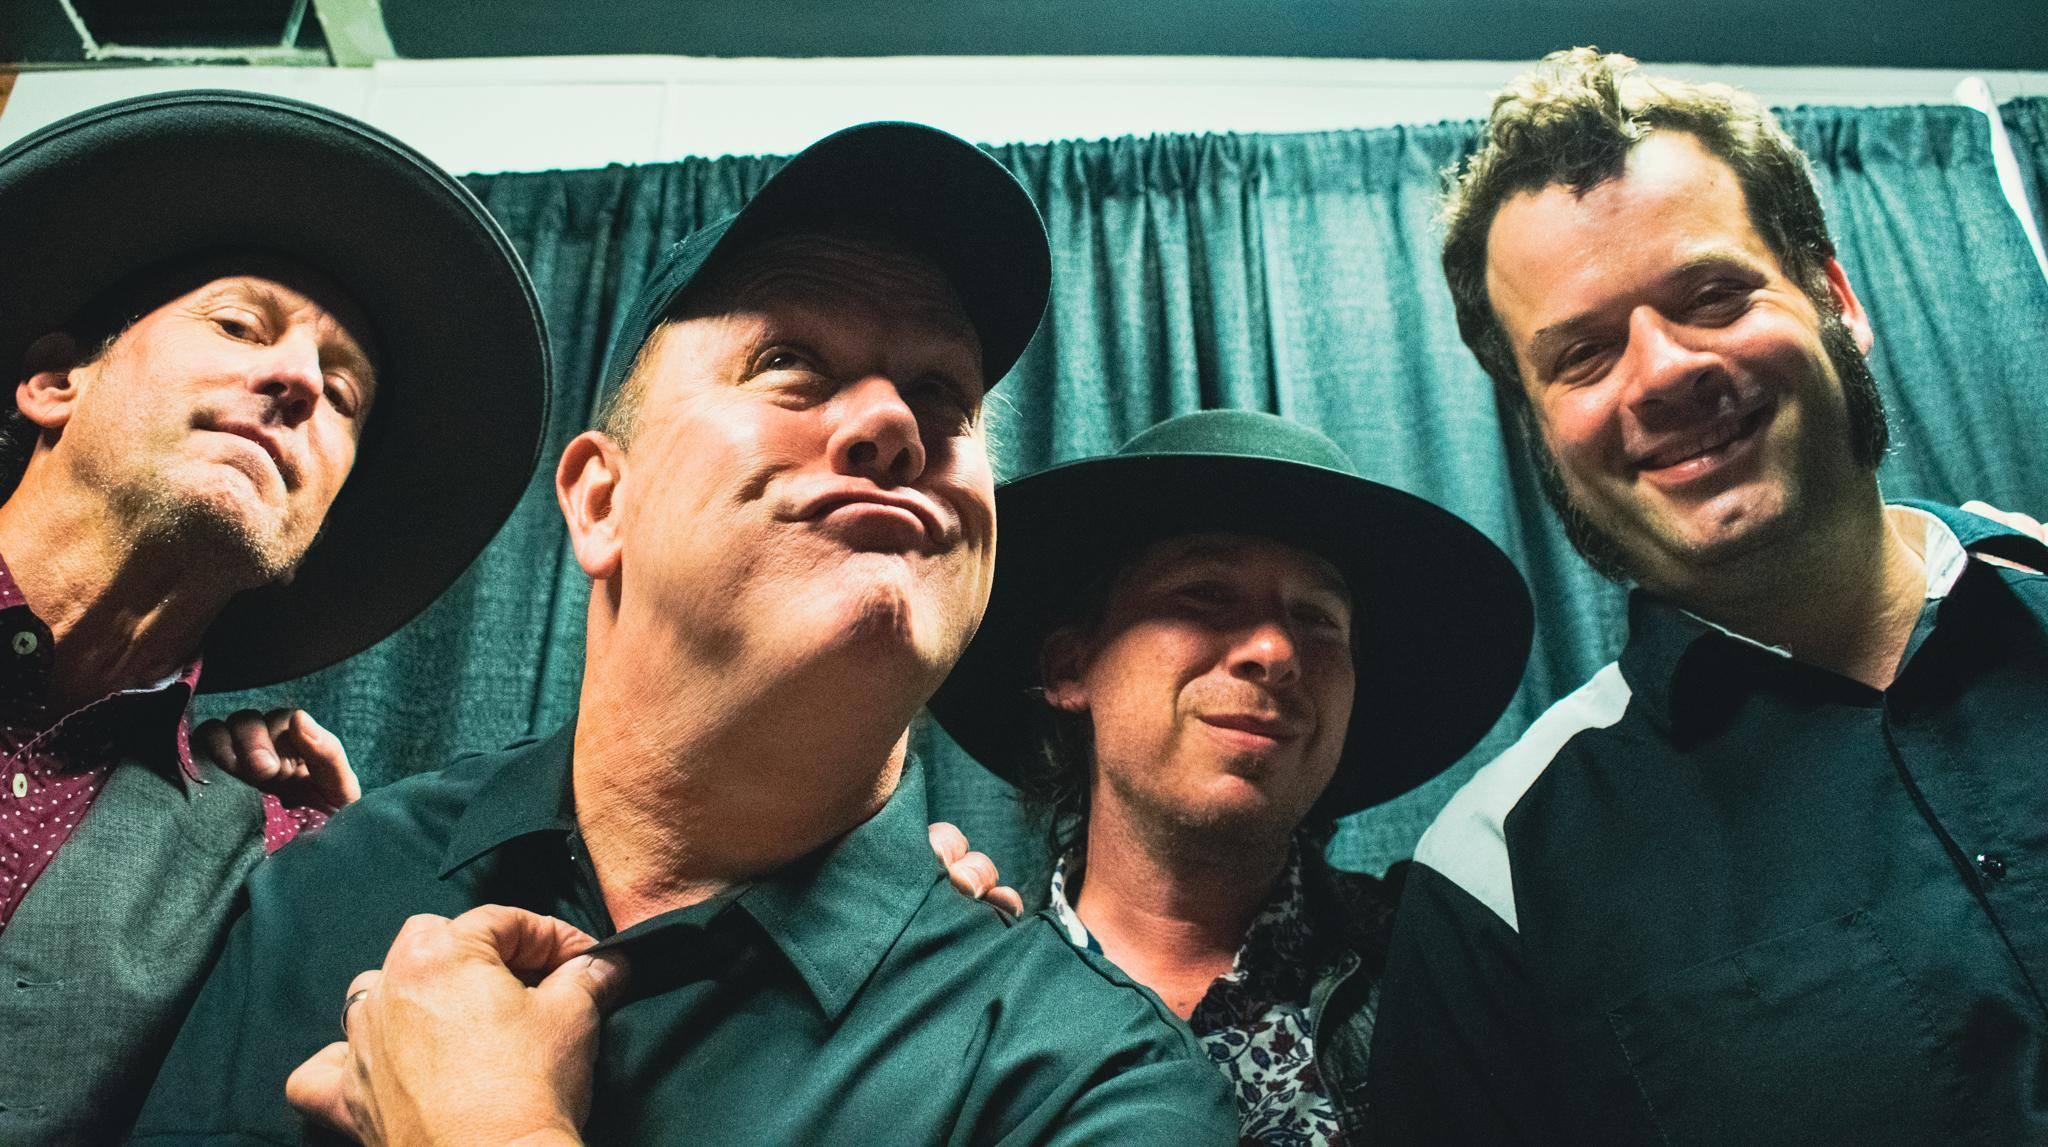 Cowboy Mouth with special guest Tiffany Pollack & Co.